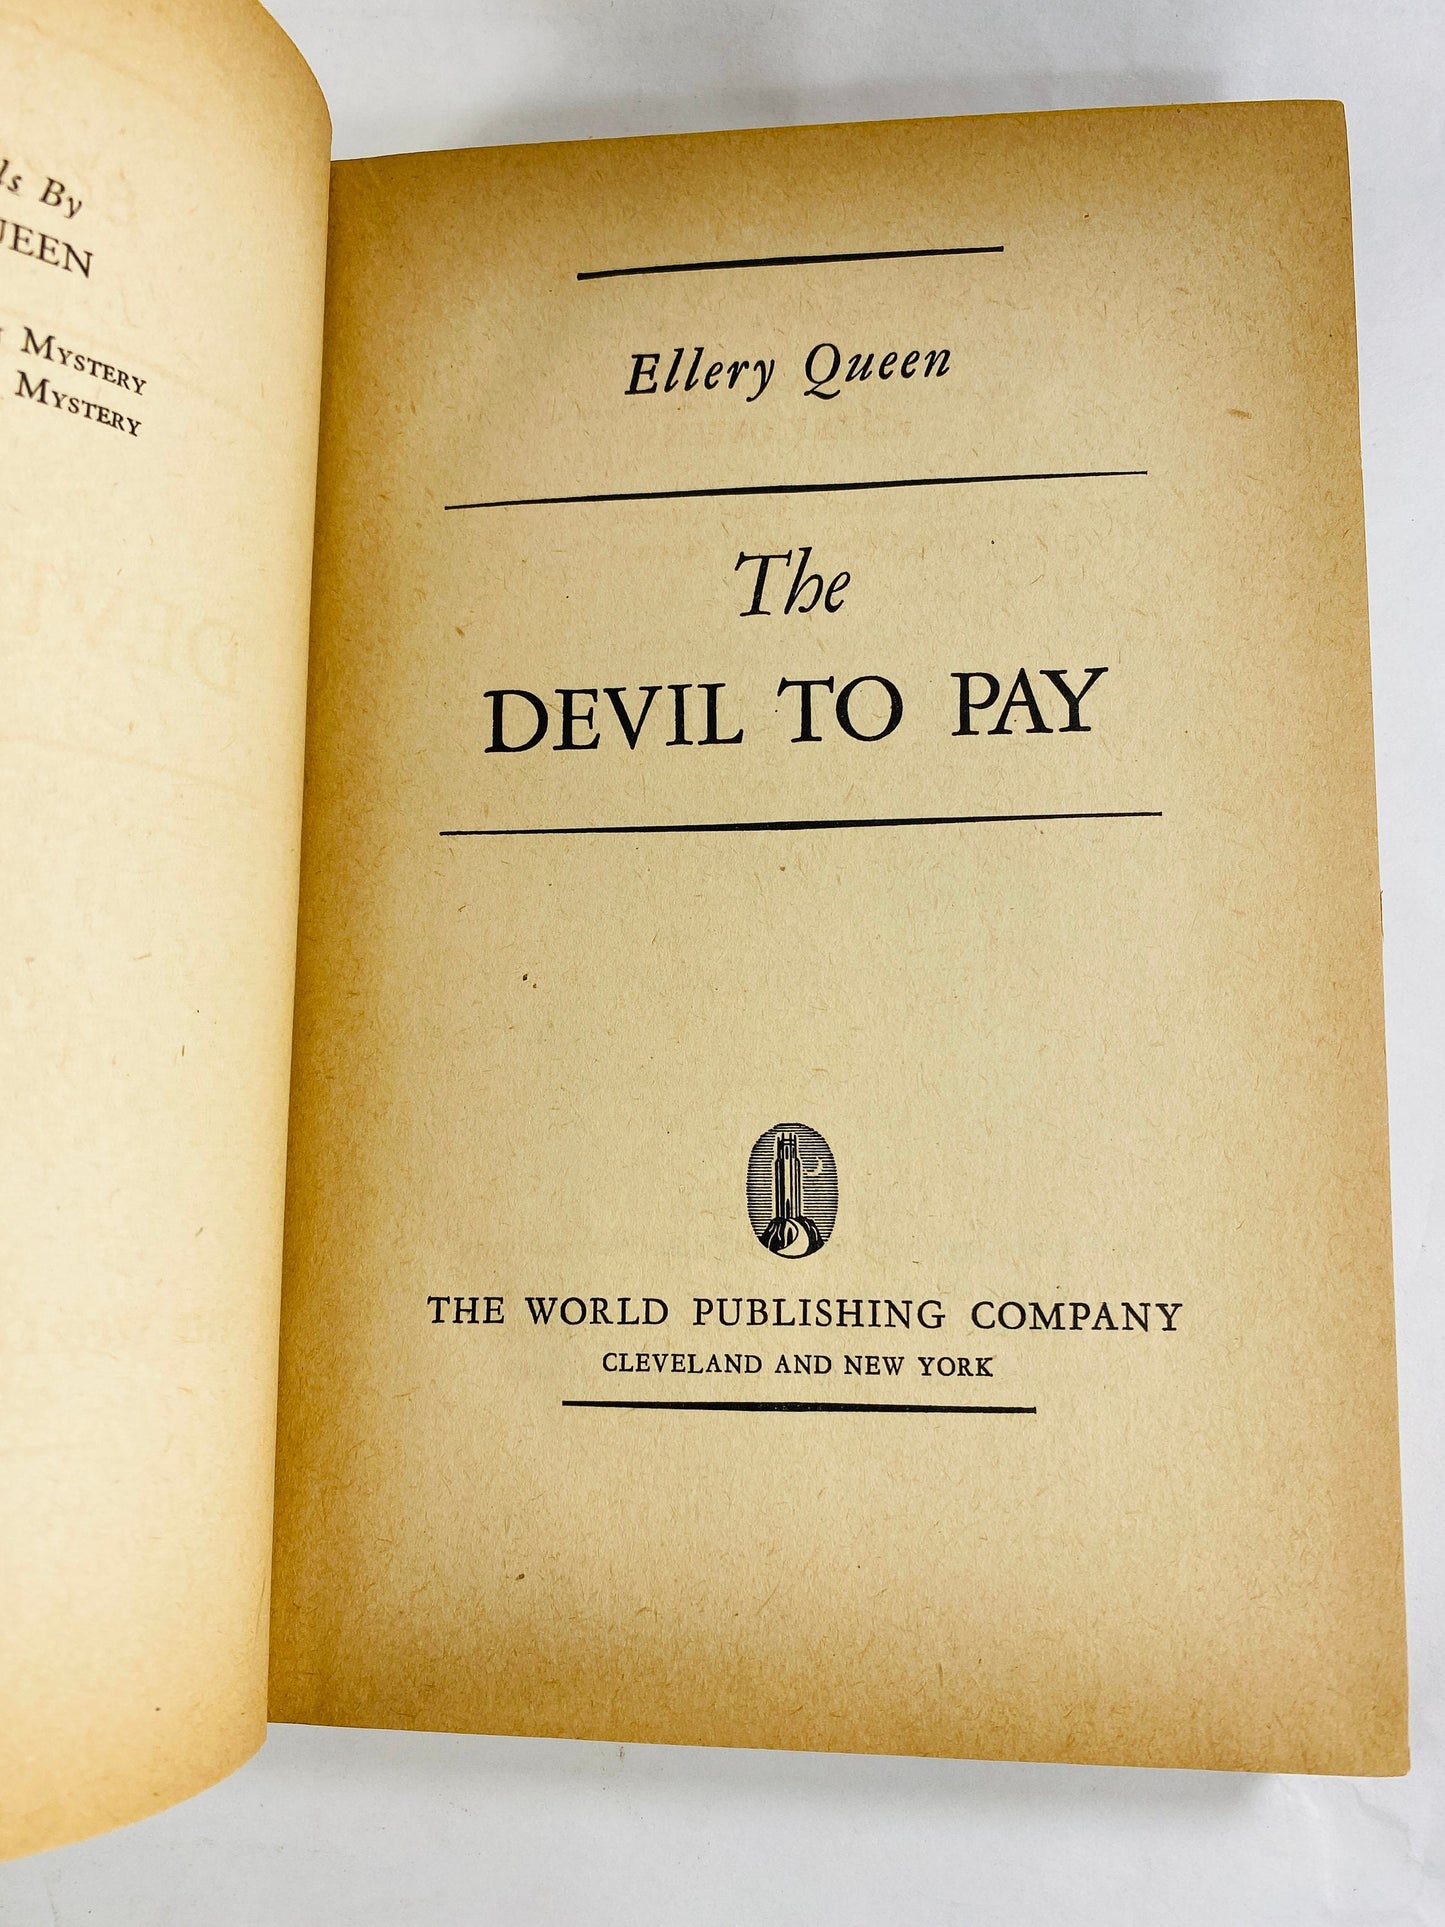 Devil to Pay by Ellery Queen vintage book circa 1943 Murder mystery which became a popular Hollywood movie.